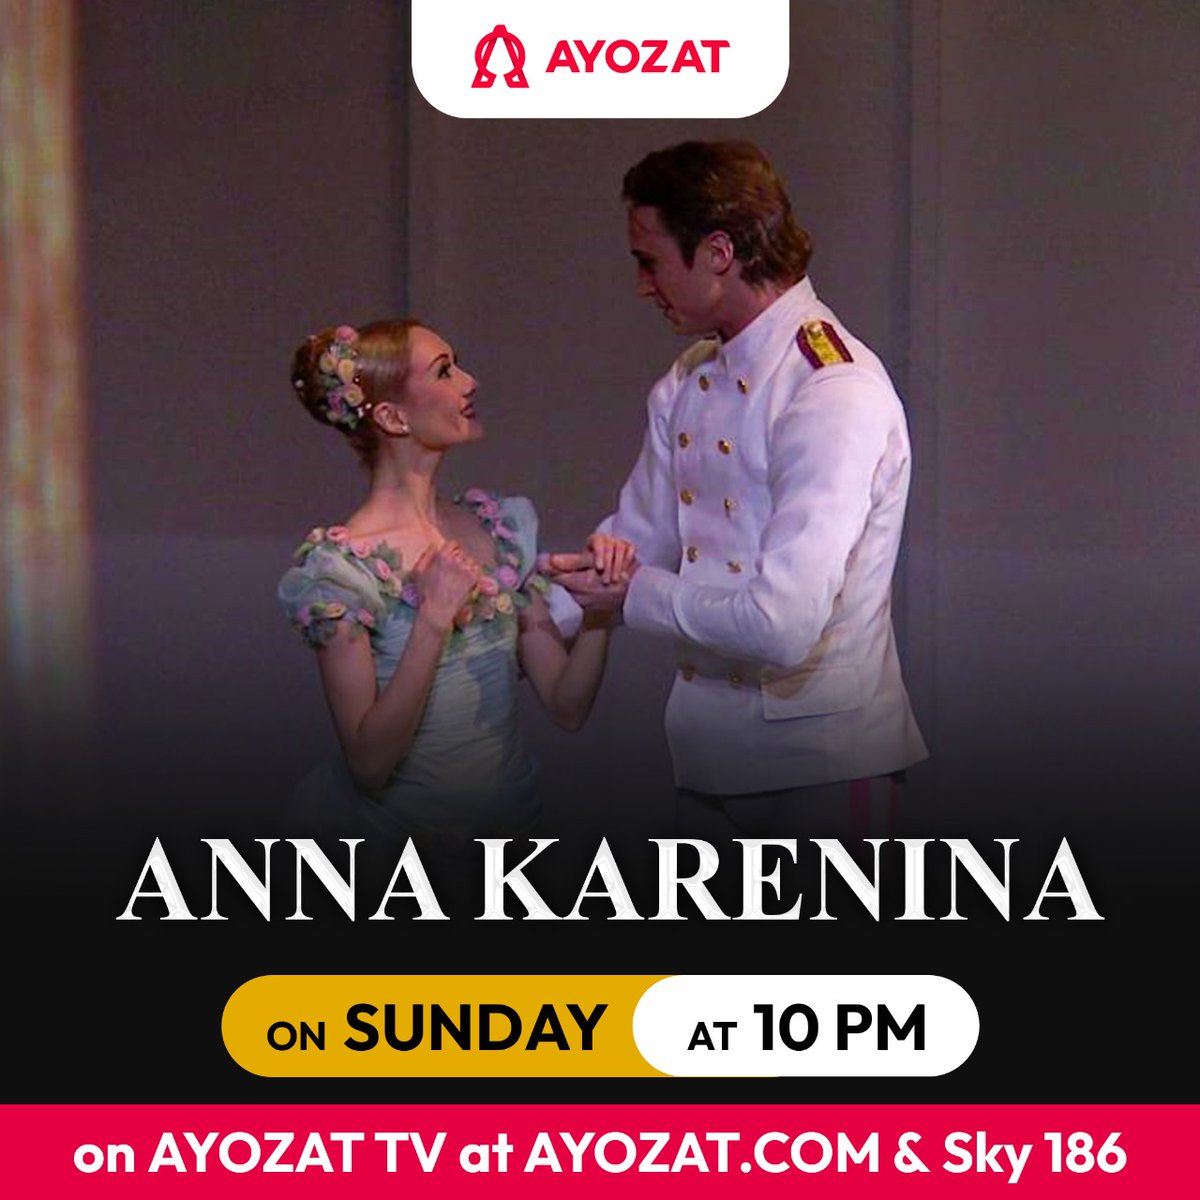 Join us this Sunday at 10pm on AYOZAT TV at Sky 186 and ayozat.com as Russian literature is brought to life in a performance of 'Anna Karenina' by the Mariinsky Ballet. Choreographed by Alexei Ratmansky. #annakarenina #ballet #dance #mariinsky